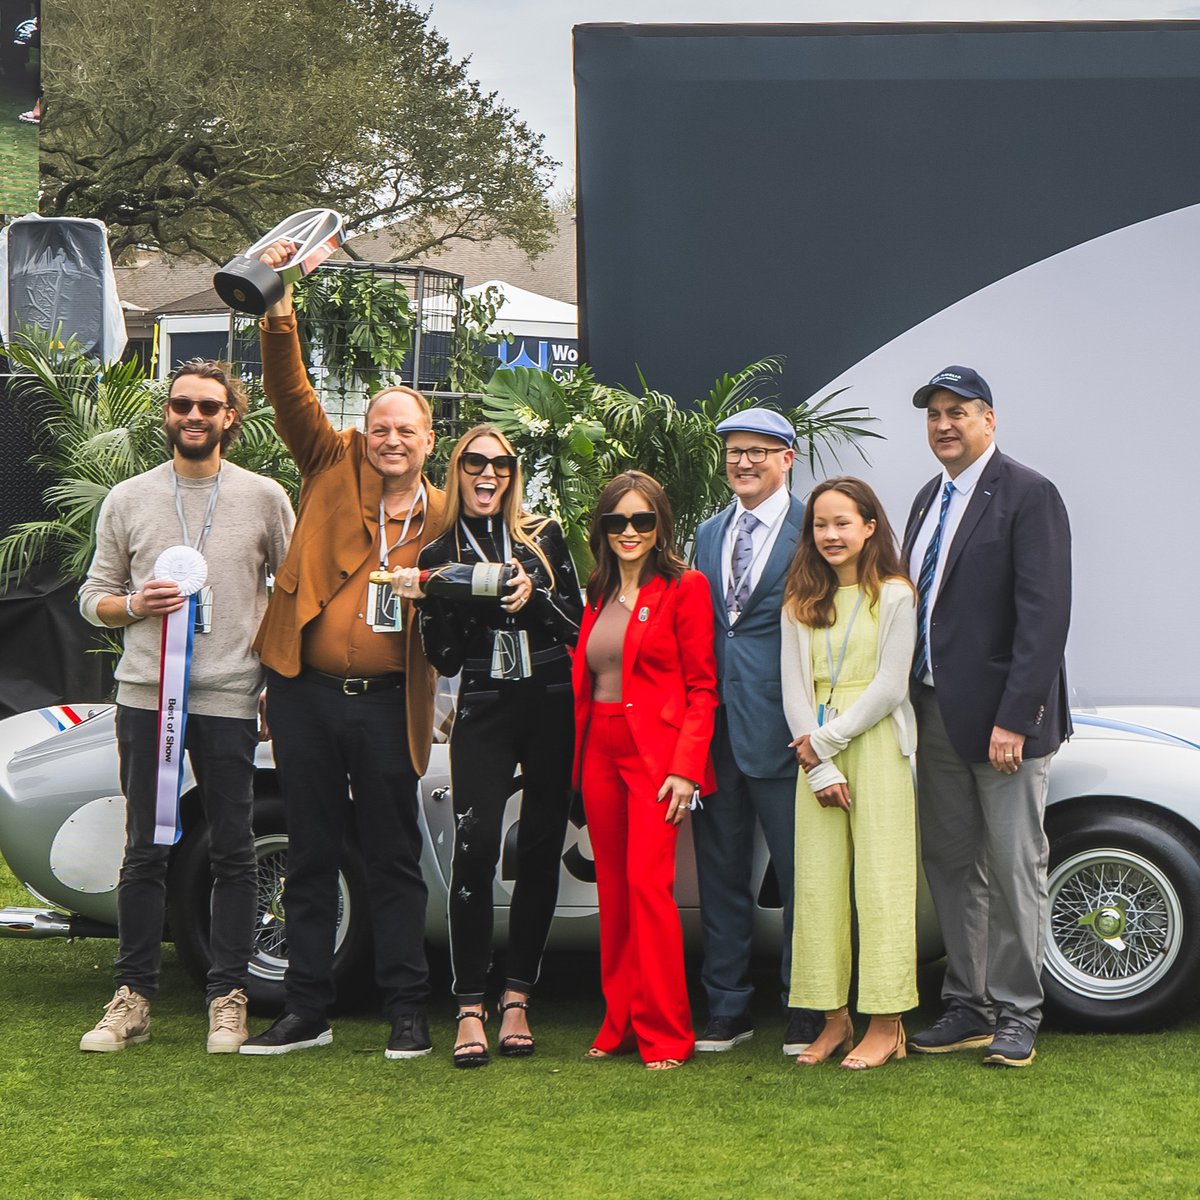 Do you love The Amelia Concours d'Elegance as much as we do?! Head on over to @USATODAY to cast your vote for Best Car Show 🏎️ 👉 bit.ly/4ar1lIl